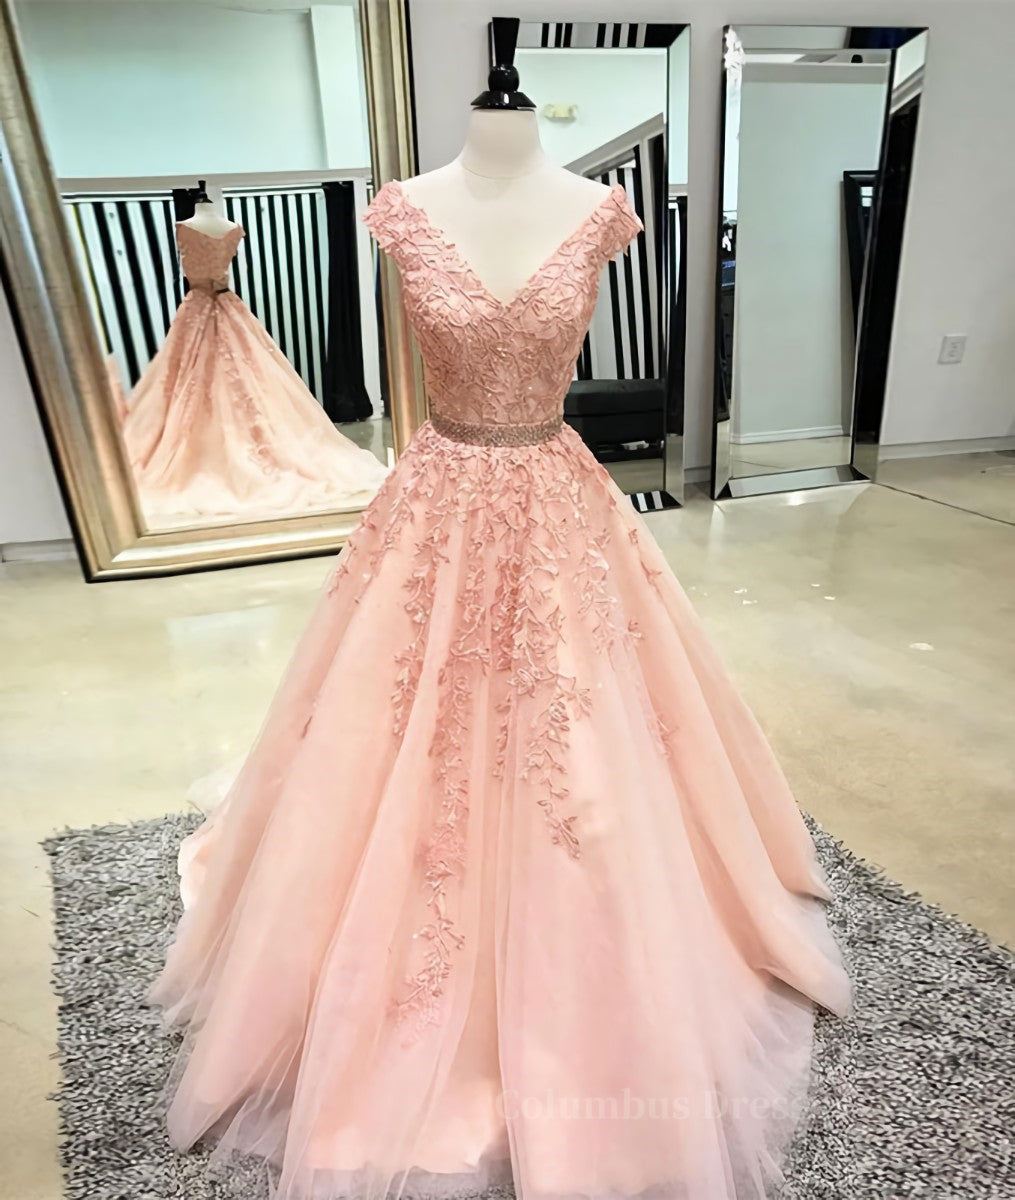 Party Dress Code Ideas, Pink v neck tulle lace applique long prom dress, pink tulle evening dress